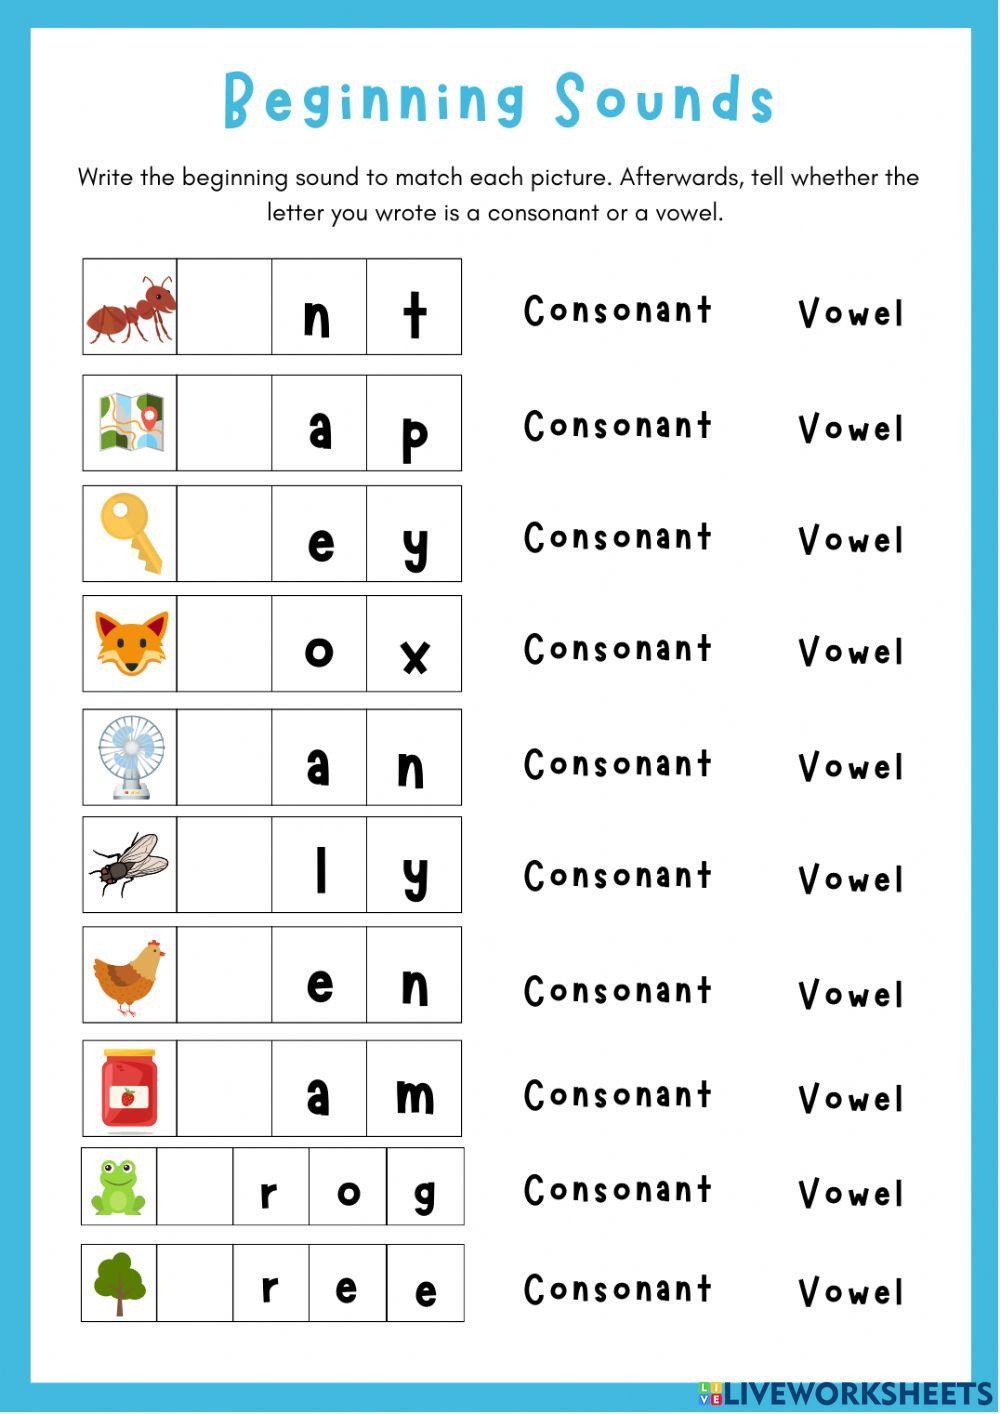 Consonants and Vowels